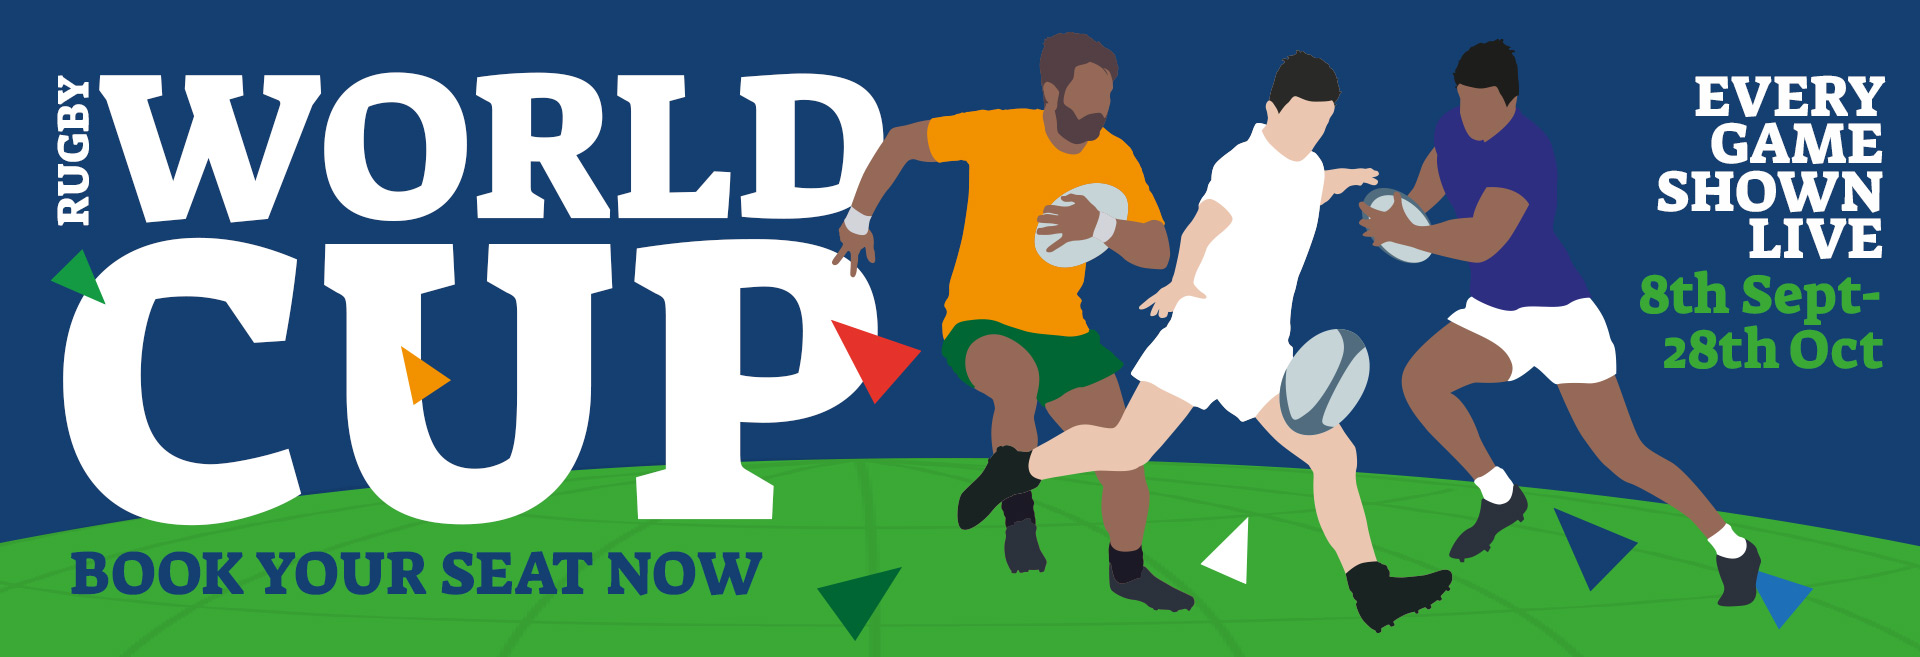 Watch the Rugby World Cup at The Garden Gate